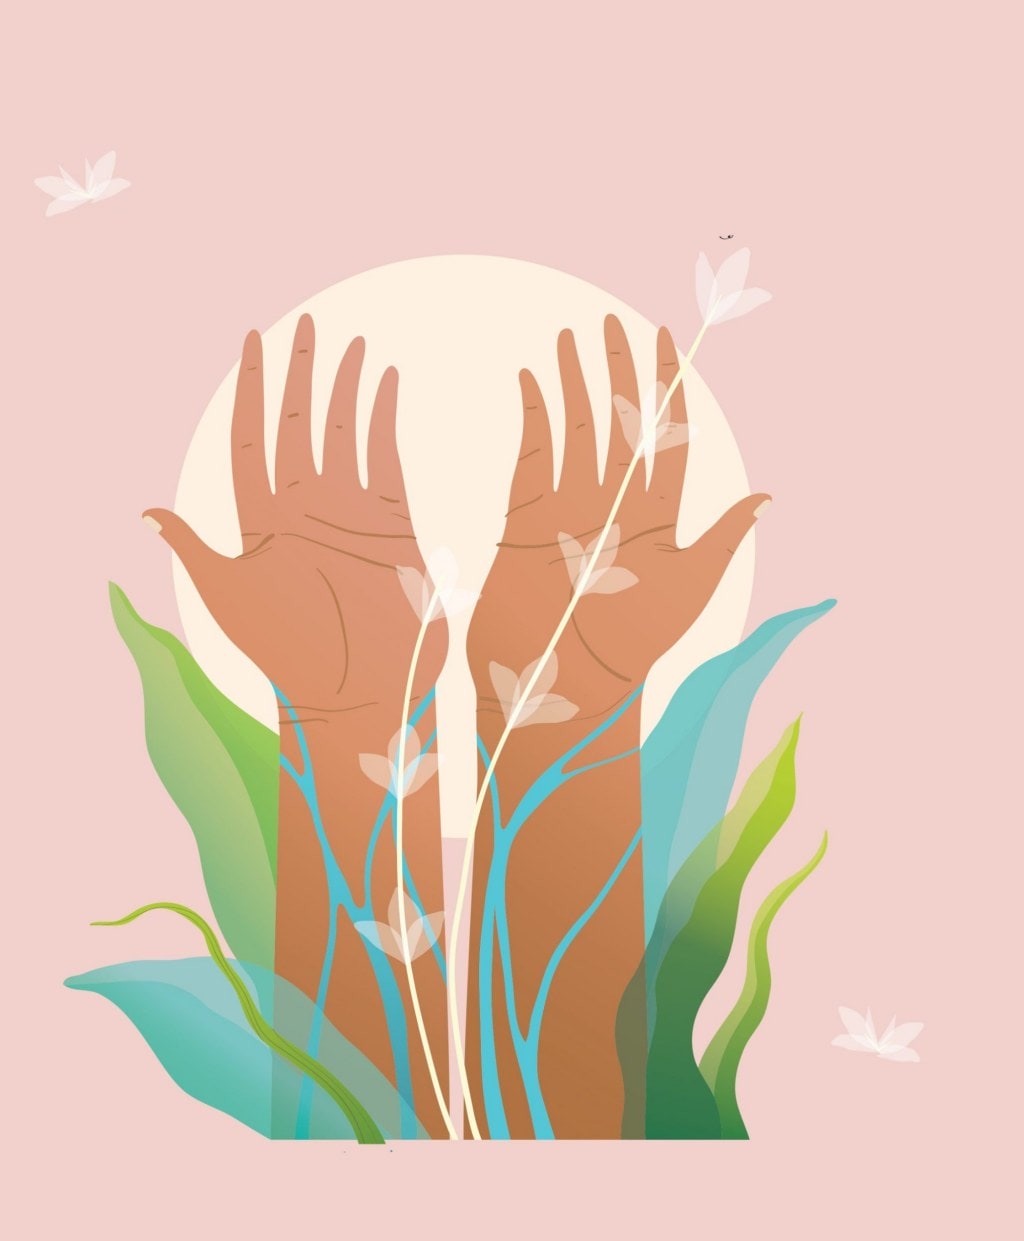 Illustration of hands reaching to the skies while surrounded by nature